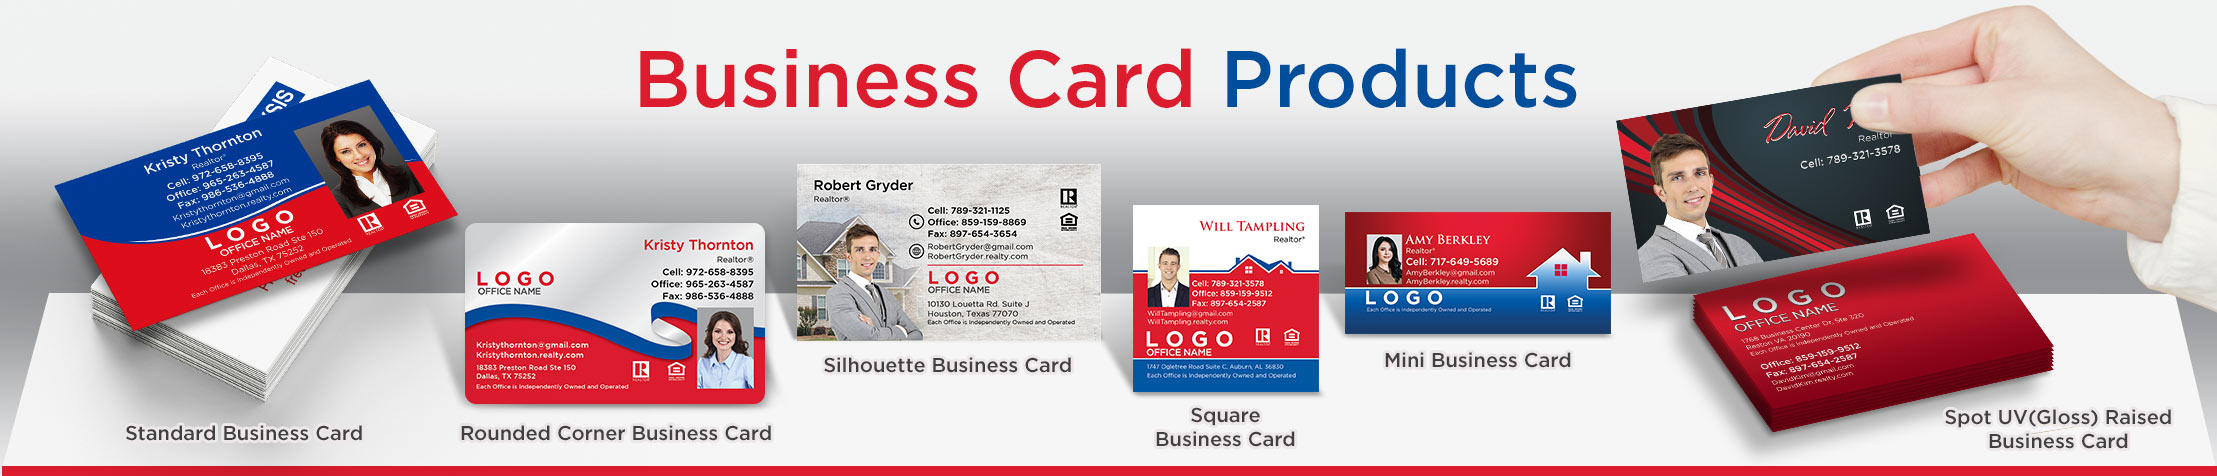 RE/MAX Real Estate Business Card Products - Unique, Custom Business Cards Printed on Quality Stock with Creative Designs for Realtors | BestPrintBuy.com